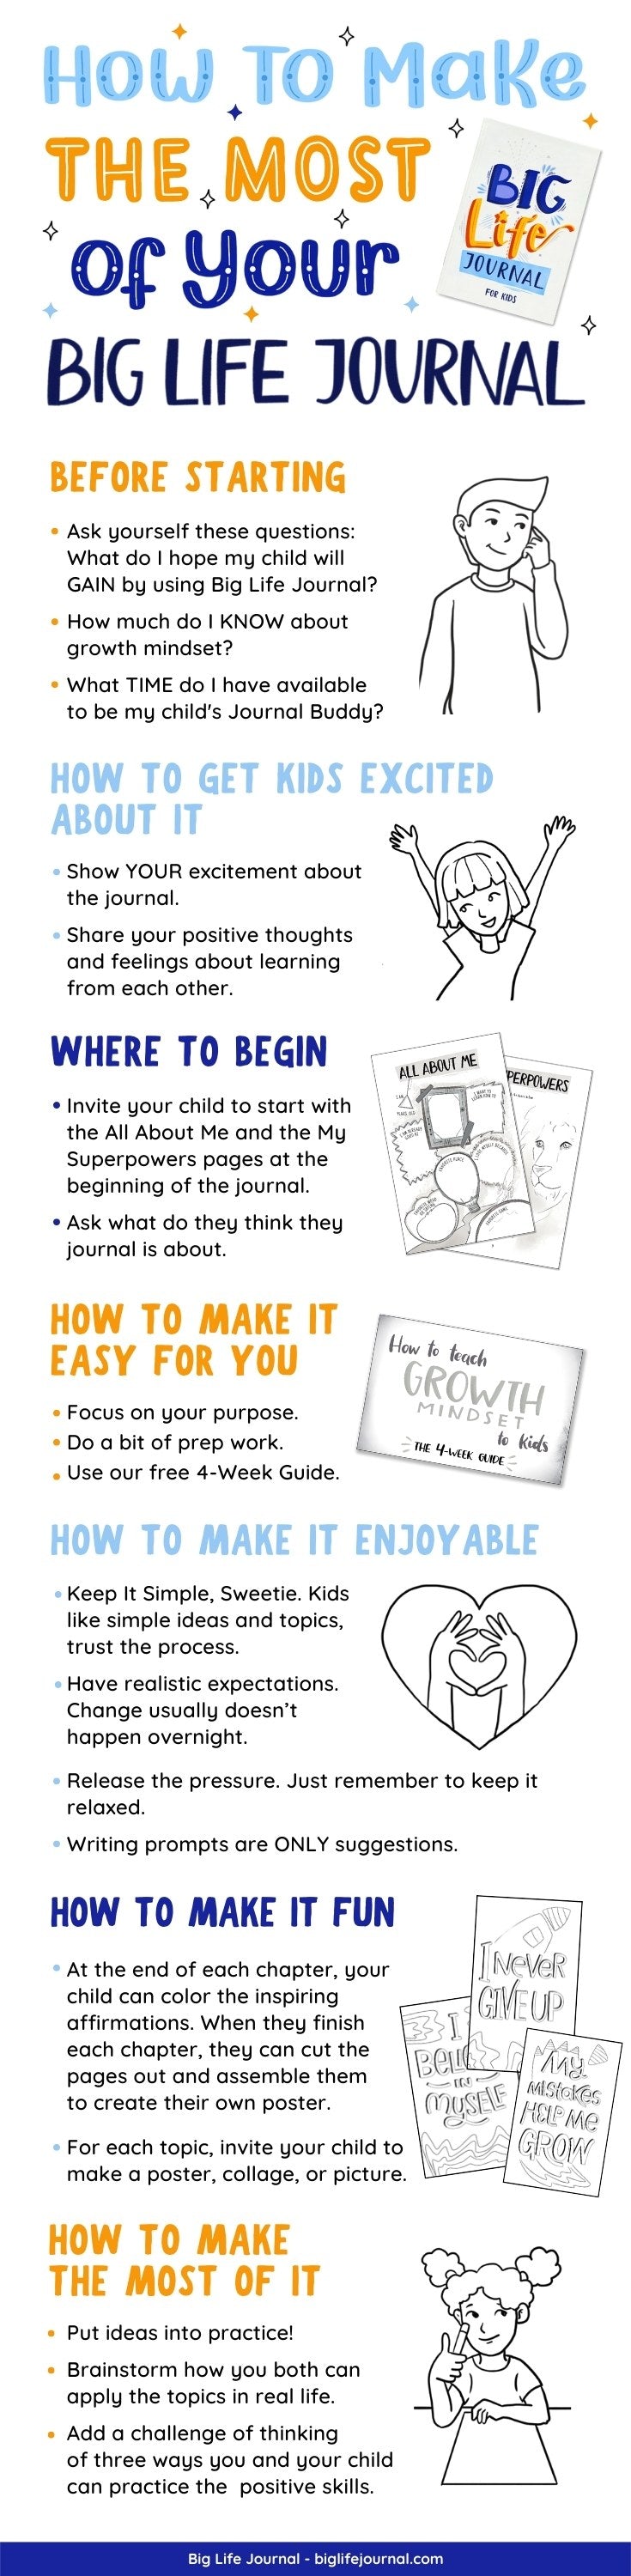 How to make the most of your Big Life Journal for Kids